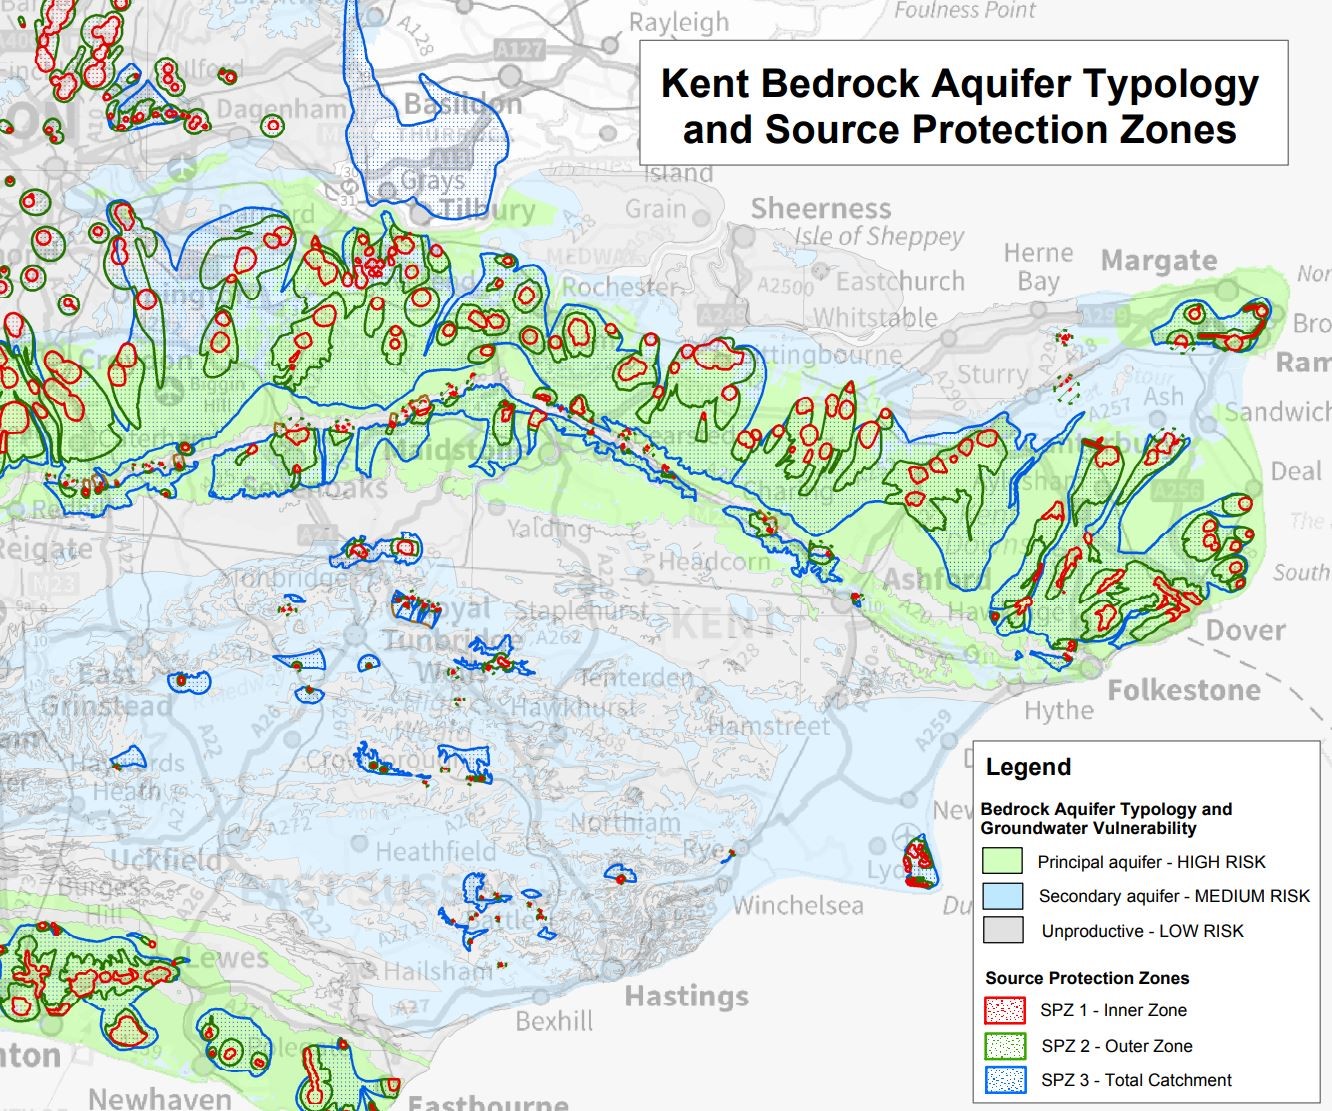 Kent Bedrock Aquifer Typology and Source Protection Zones